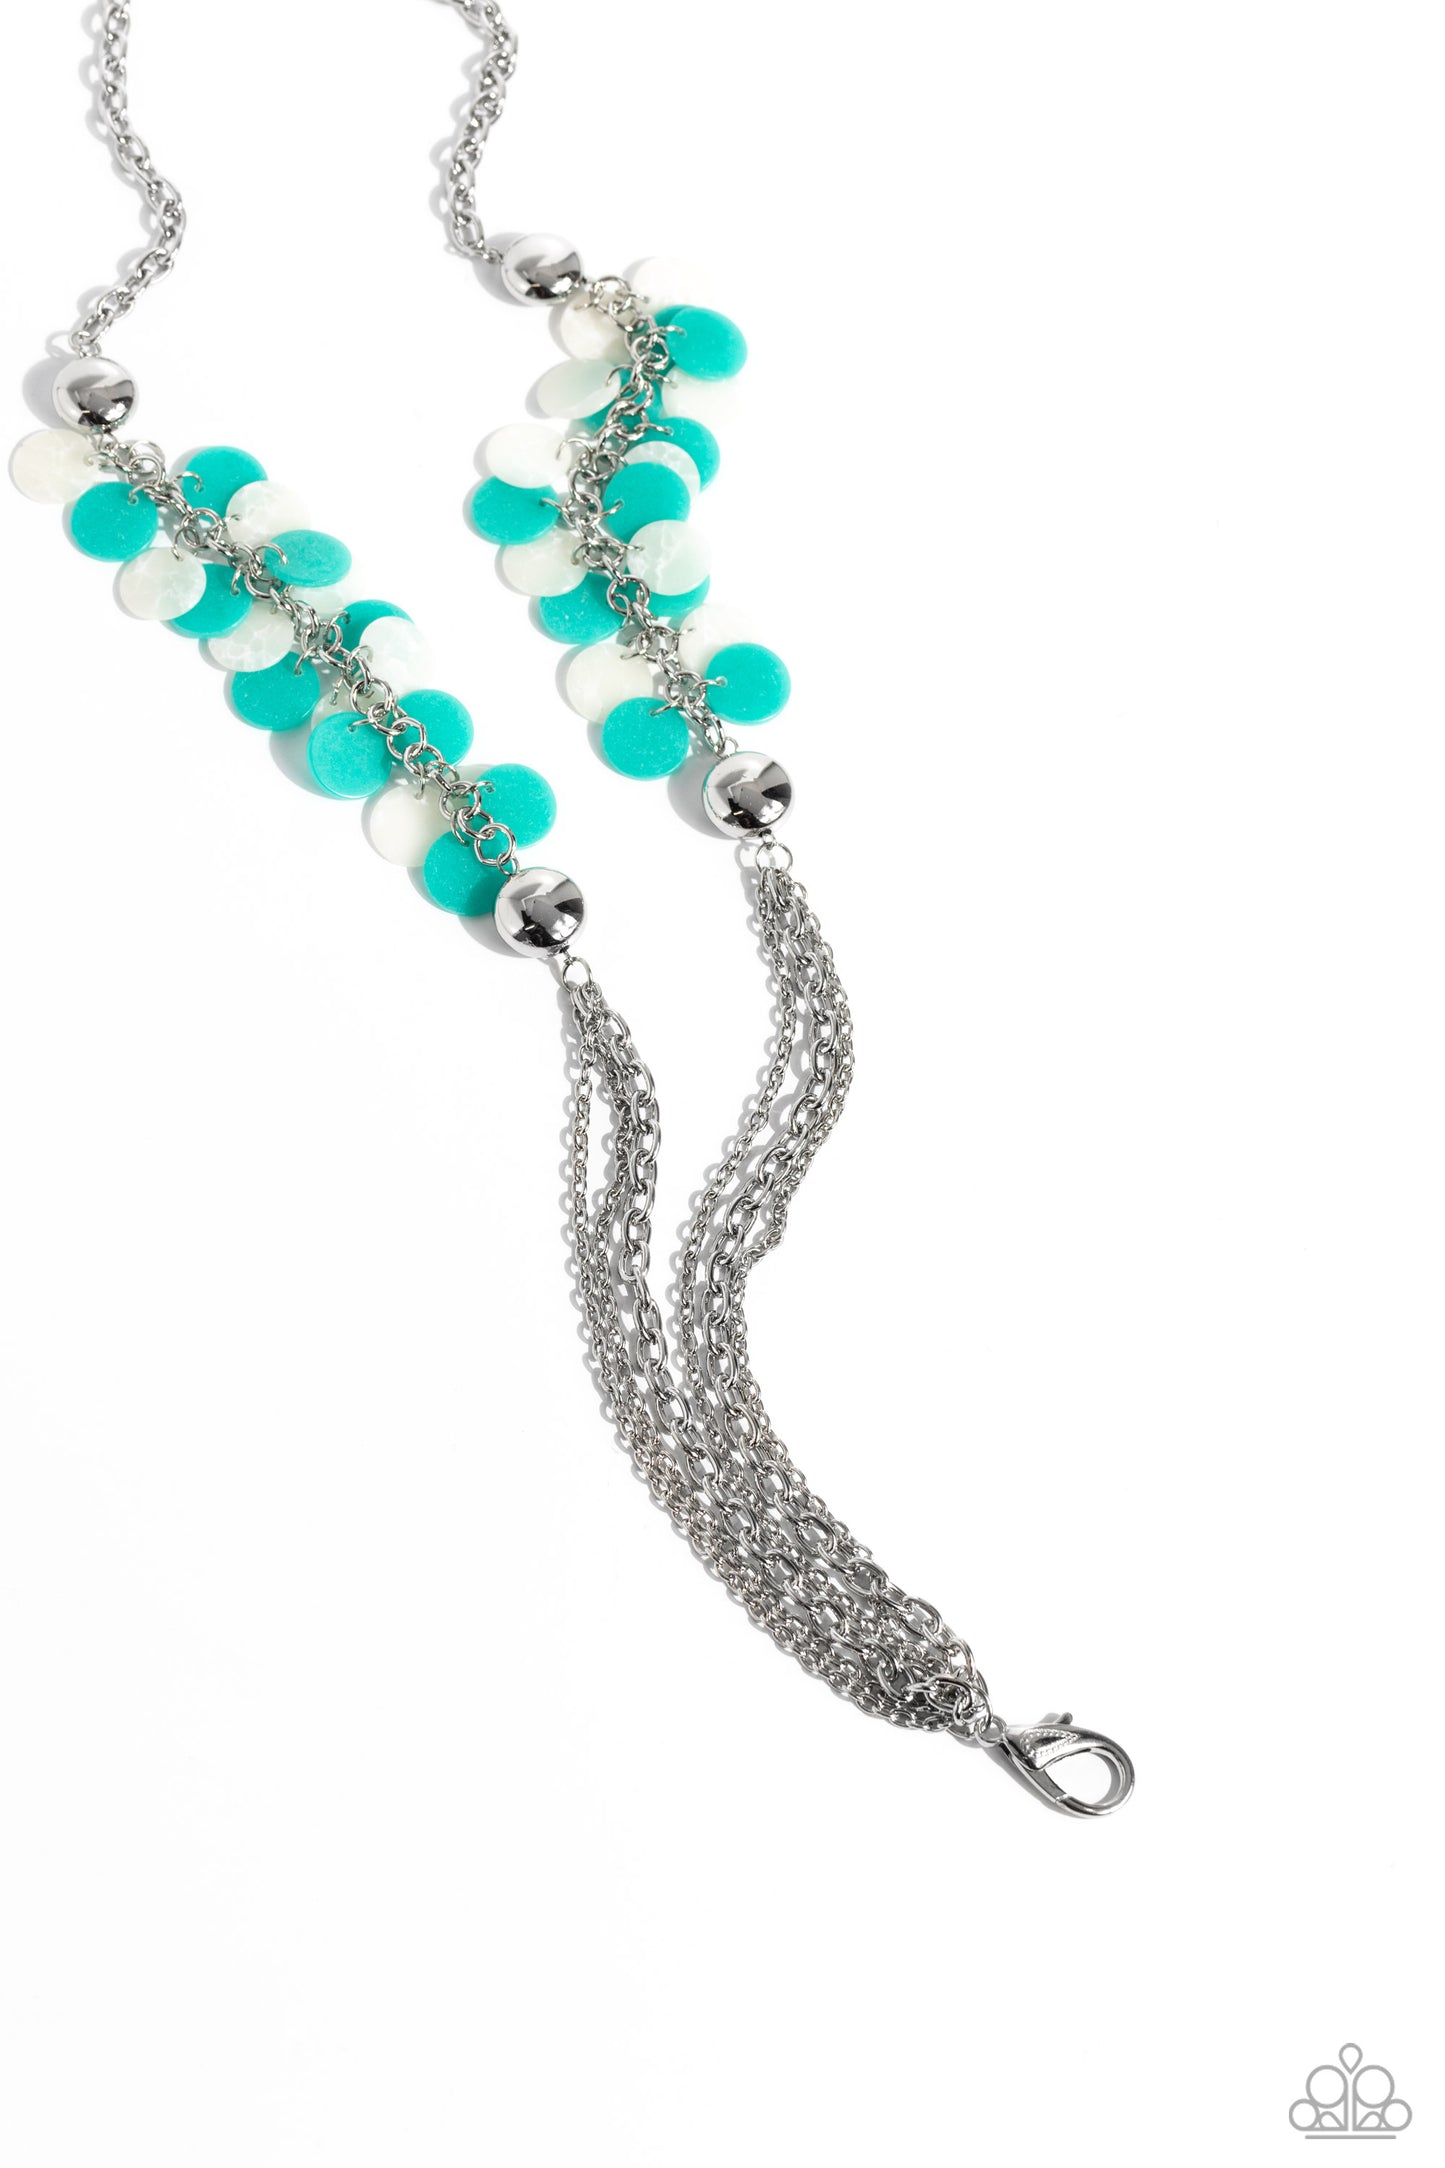 Paparazzi Accessories - Shell Sensation - Green Necklaces flared between two oversized silver beads, a collection of turquoise and white shell-like beads give way to sections of silver chains that connect across the chest for a colorful summery look. A lobster clasp hangs from the bottom of the elongated design to allow a name badge or other item to be attached. Features an adjustable clasp closure.  Sold as one individual lanyard. Includes one pair of matching earrings.